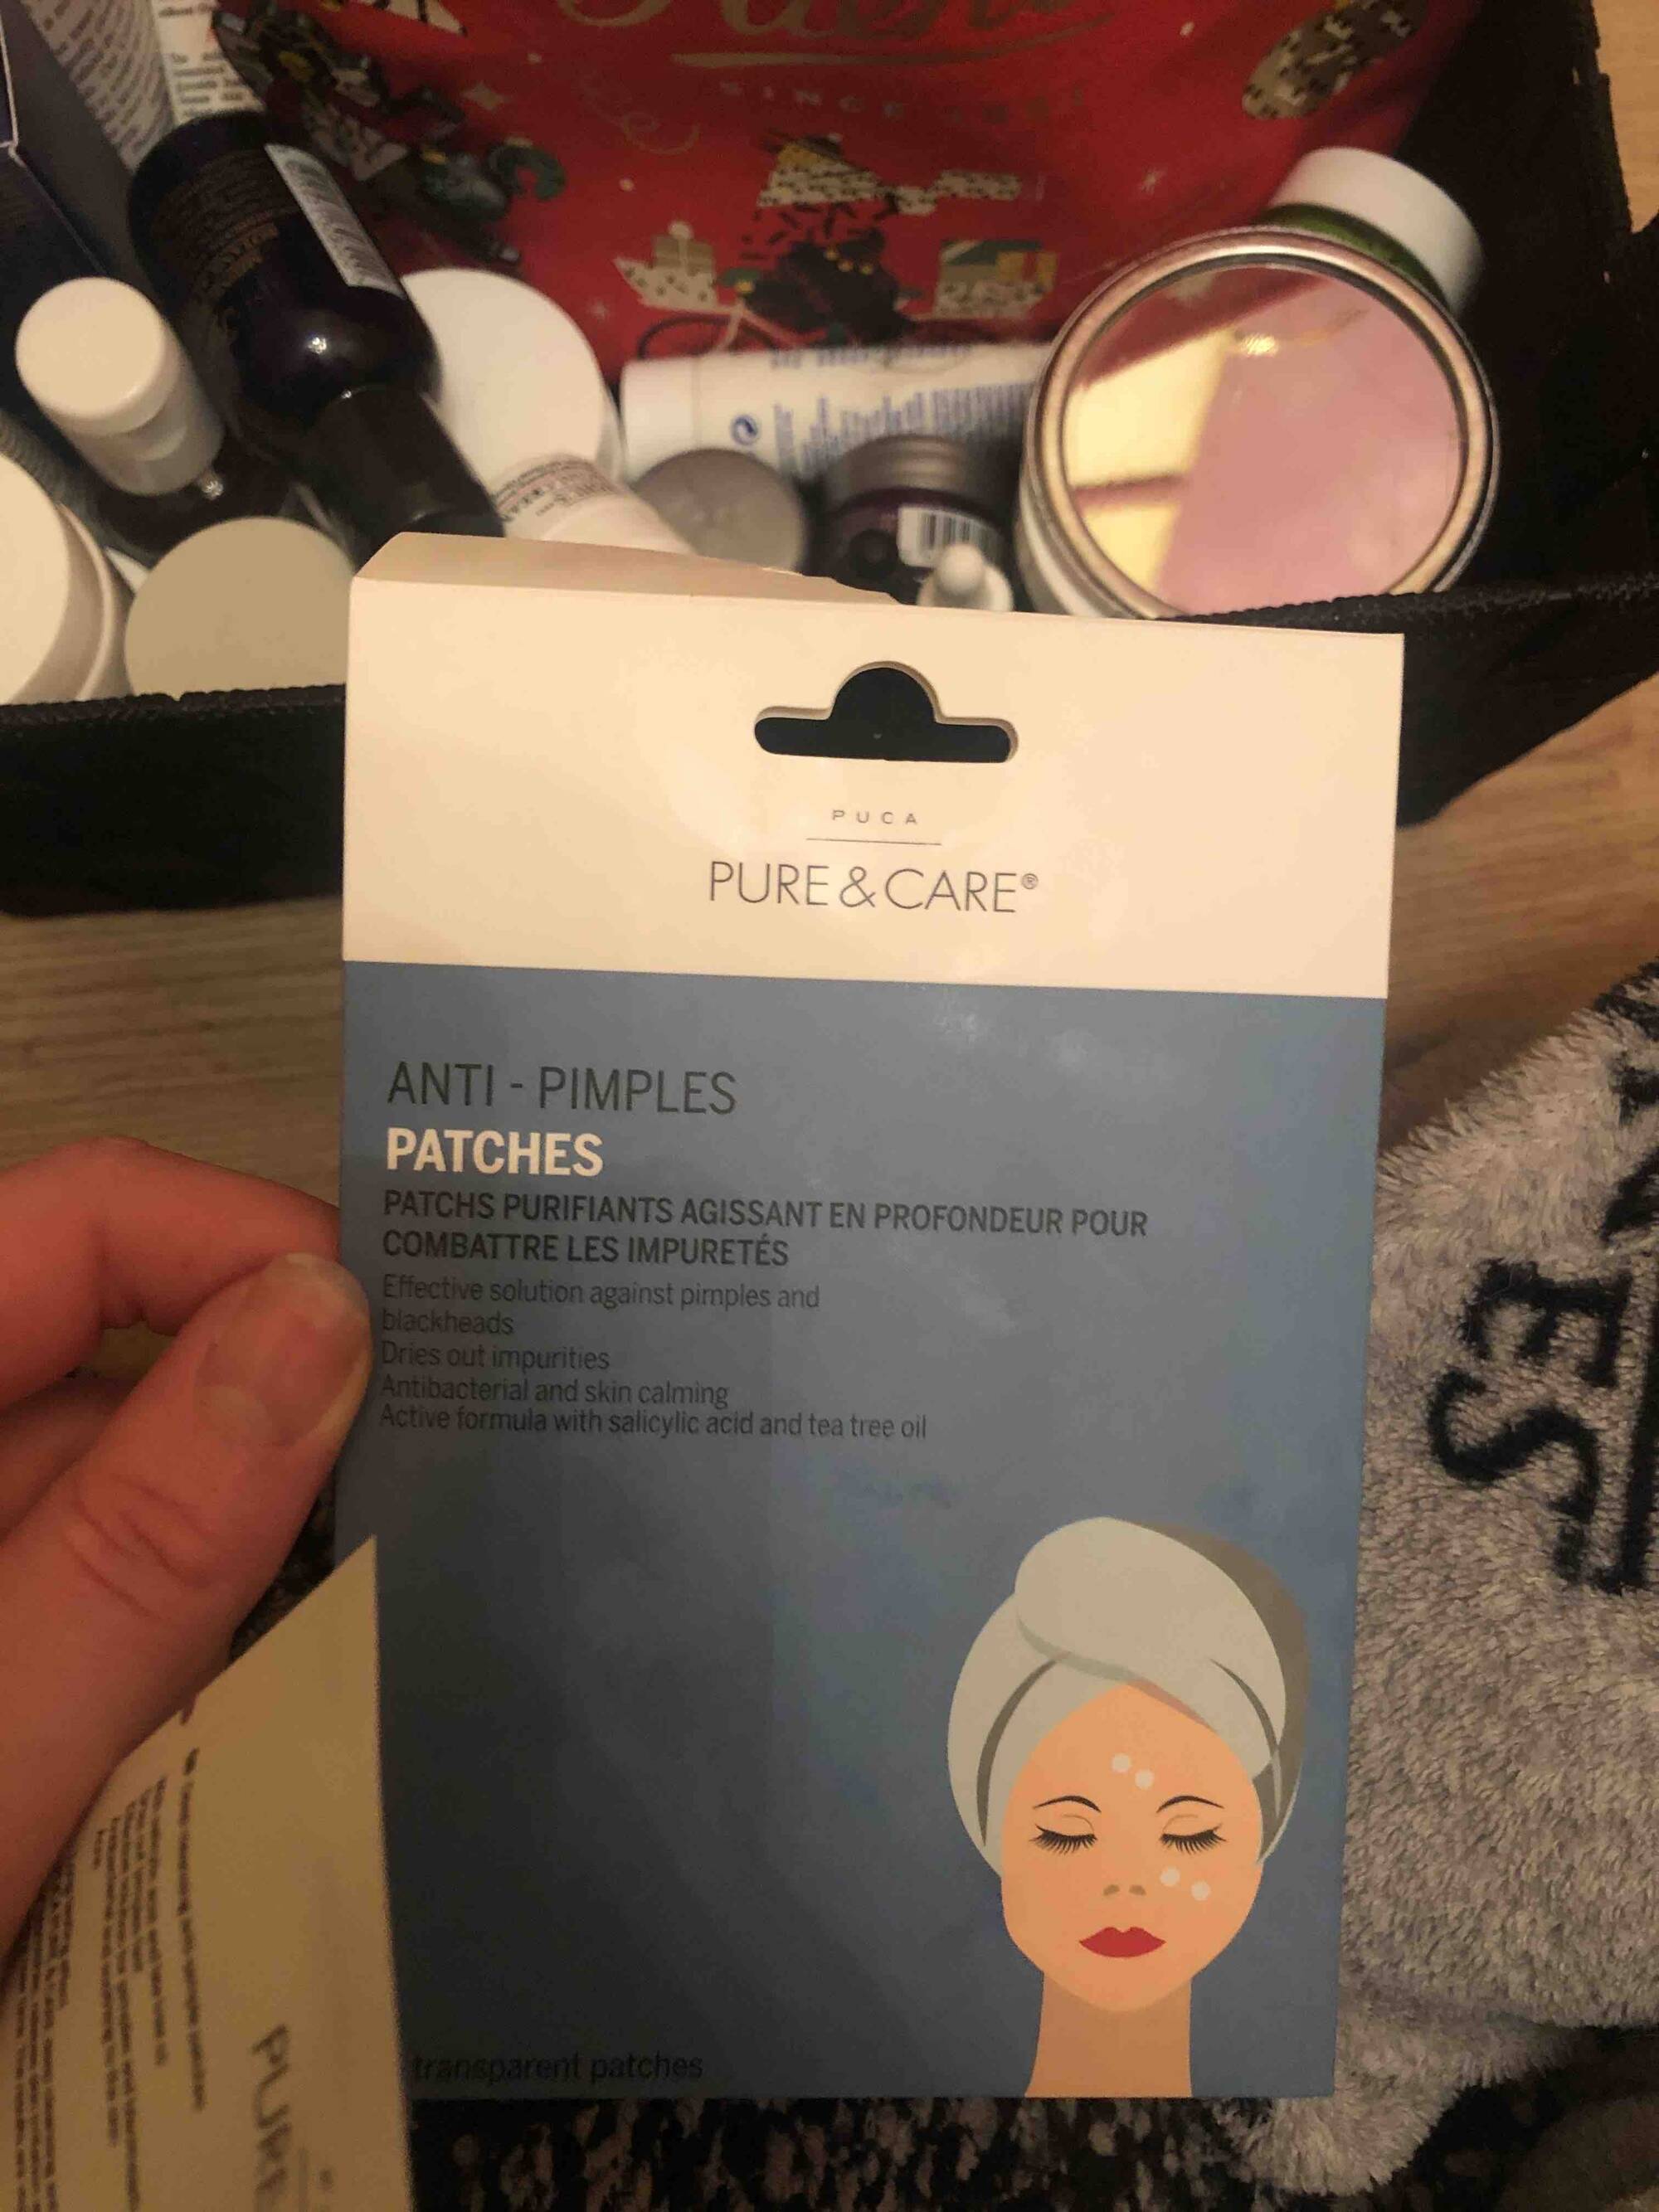 PURE & CARE - Anti-pimples - Patches